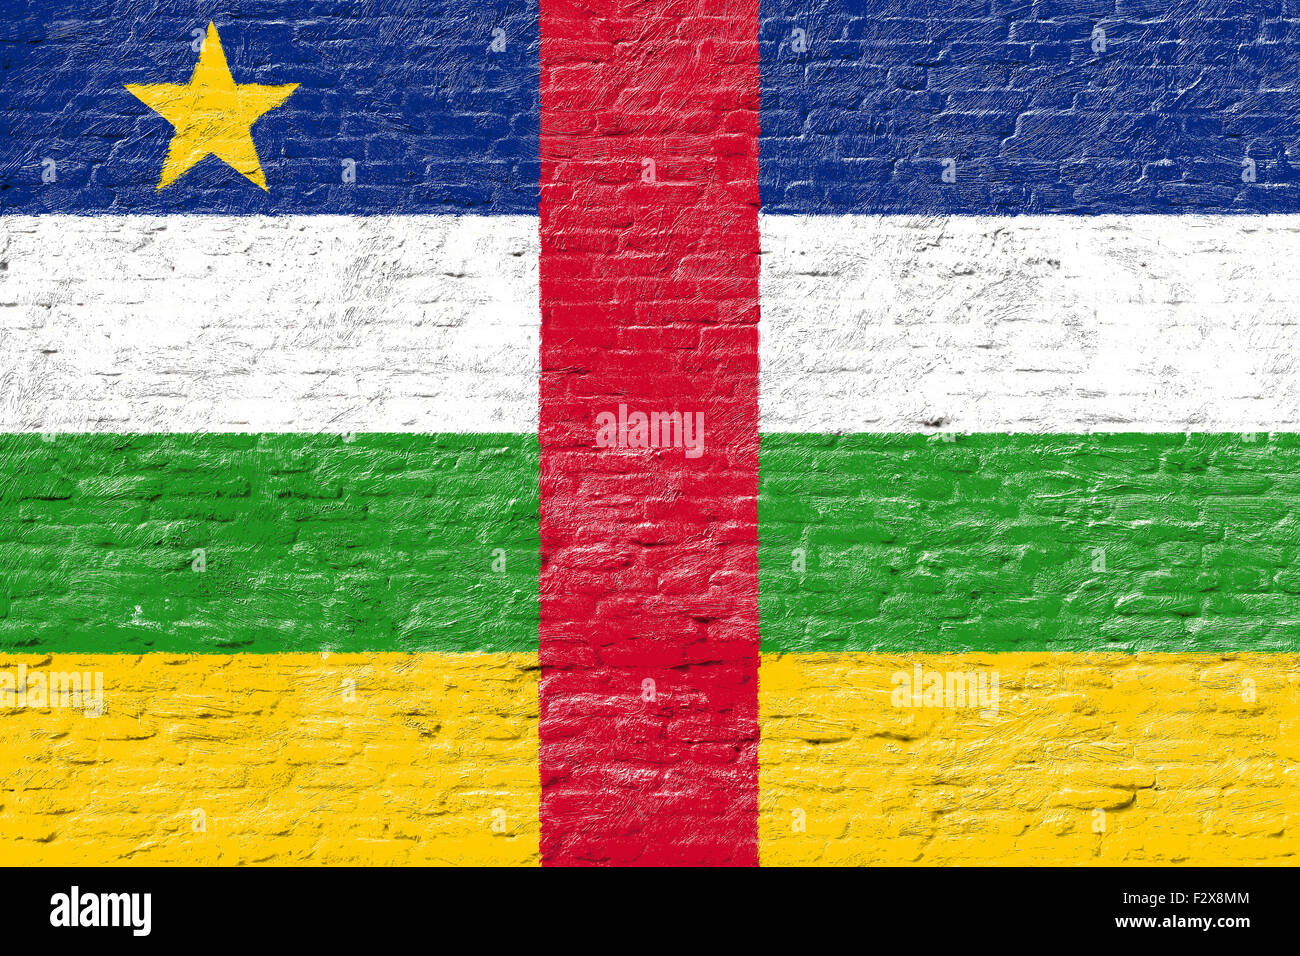 Central African Republic - National flag on Brick wall Stock Photo